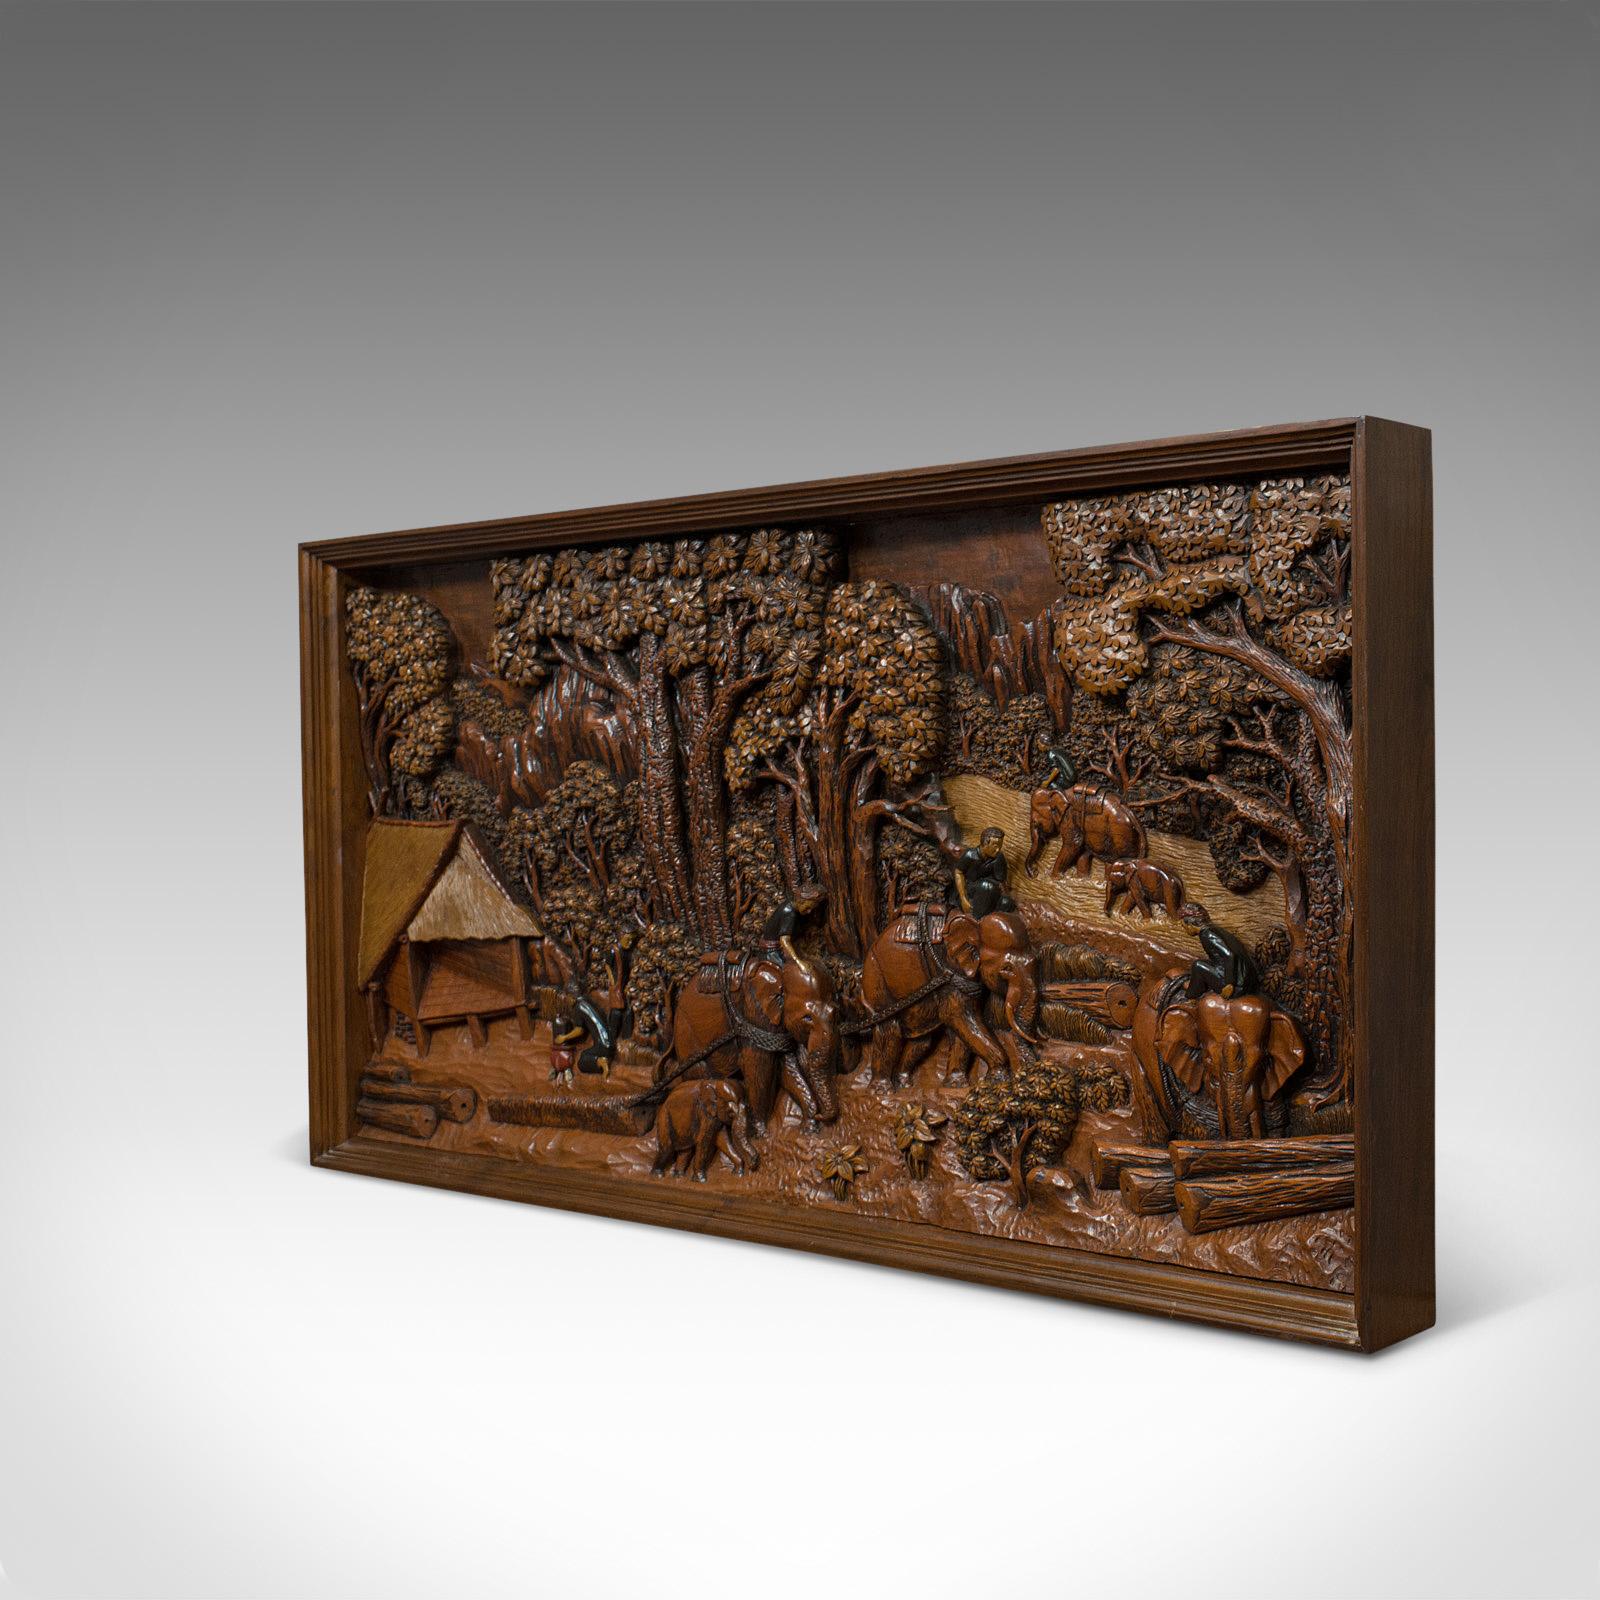 This is a vintage carved wall panel. An English, ironwood decorative frieze depicting a jungle clearing and dating to the 20th century.

Striking detail and broad, impressive form
Displays a desirable aged patina
Stocks of ironwood in good order